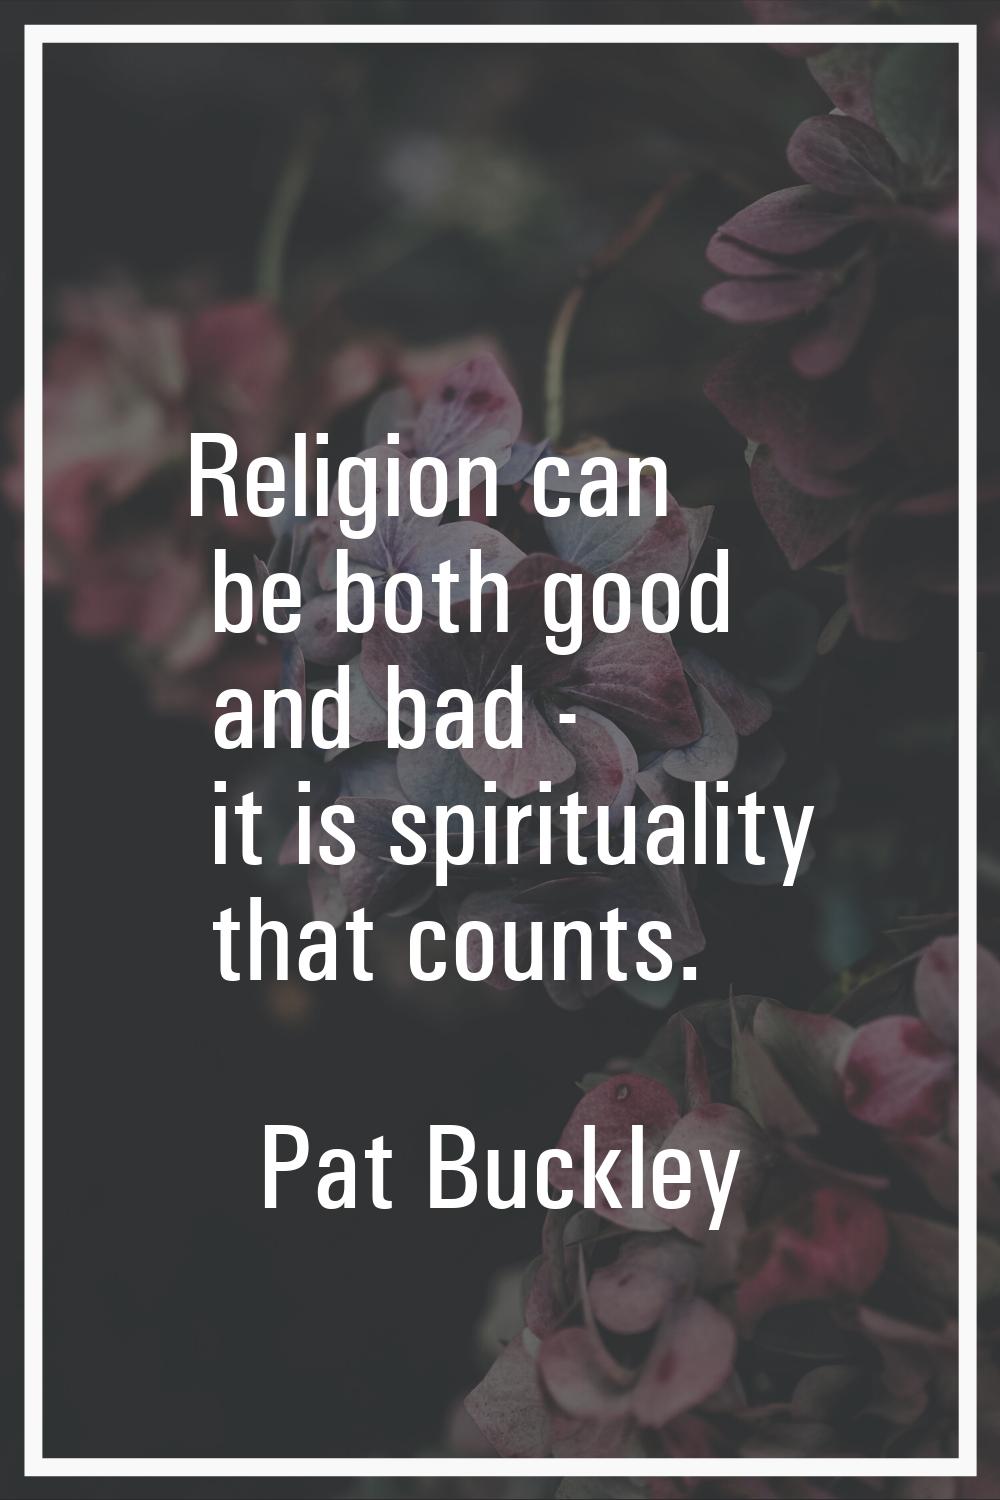 Religion can be both good and bad - it is spirituality that counts.